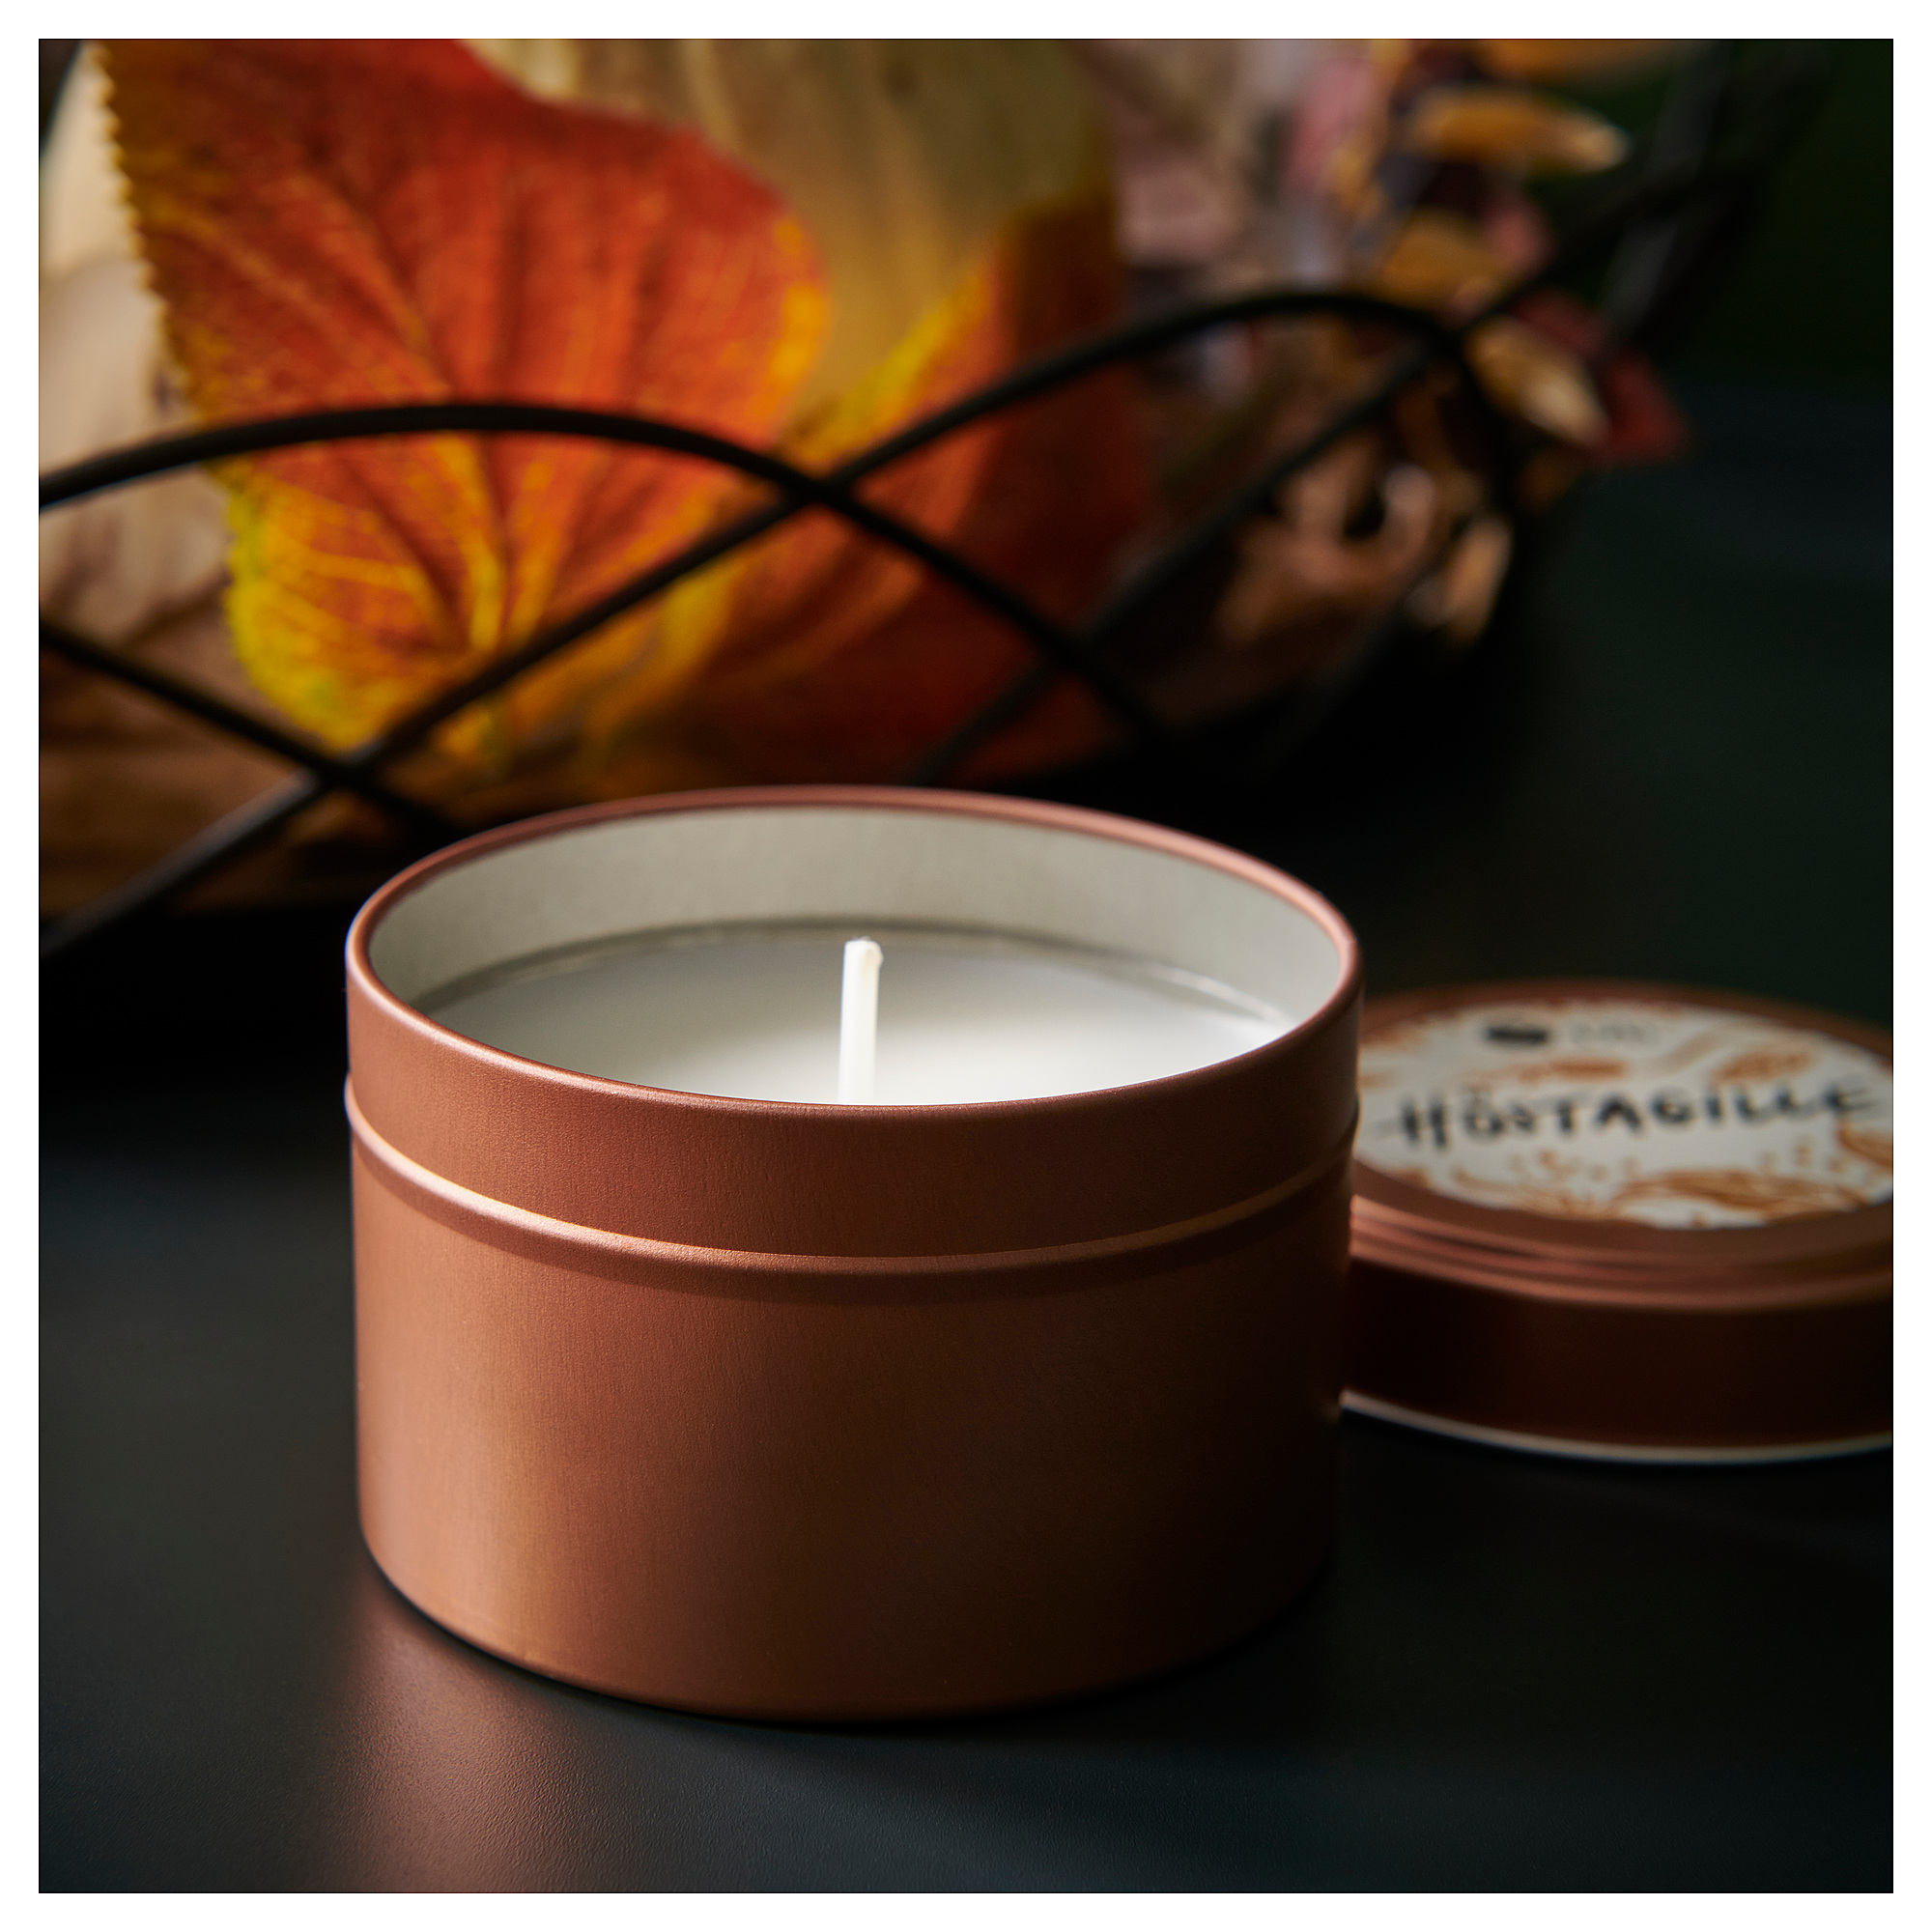 HÖSTAGILLE scented candle in metal tin